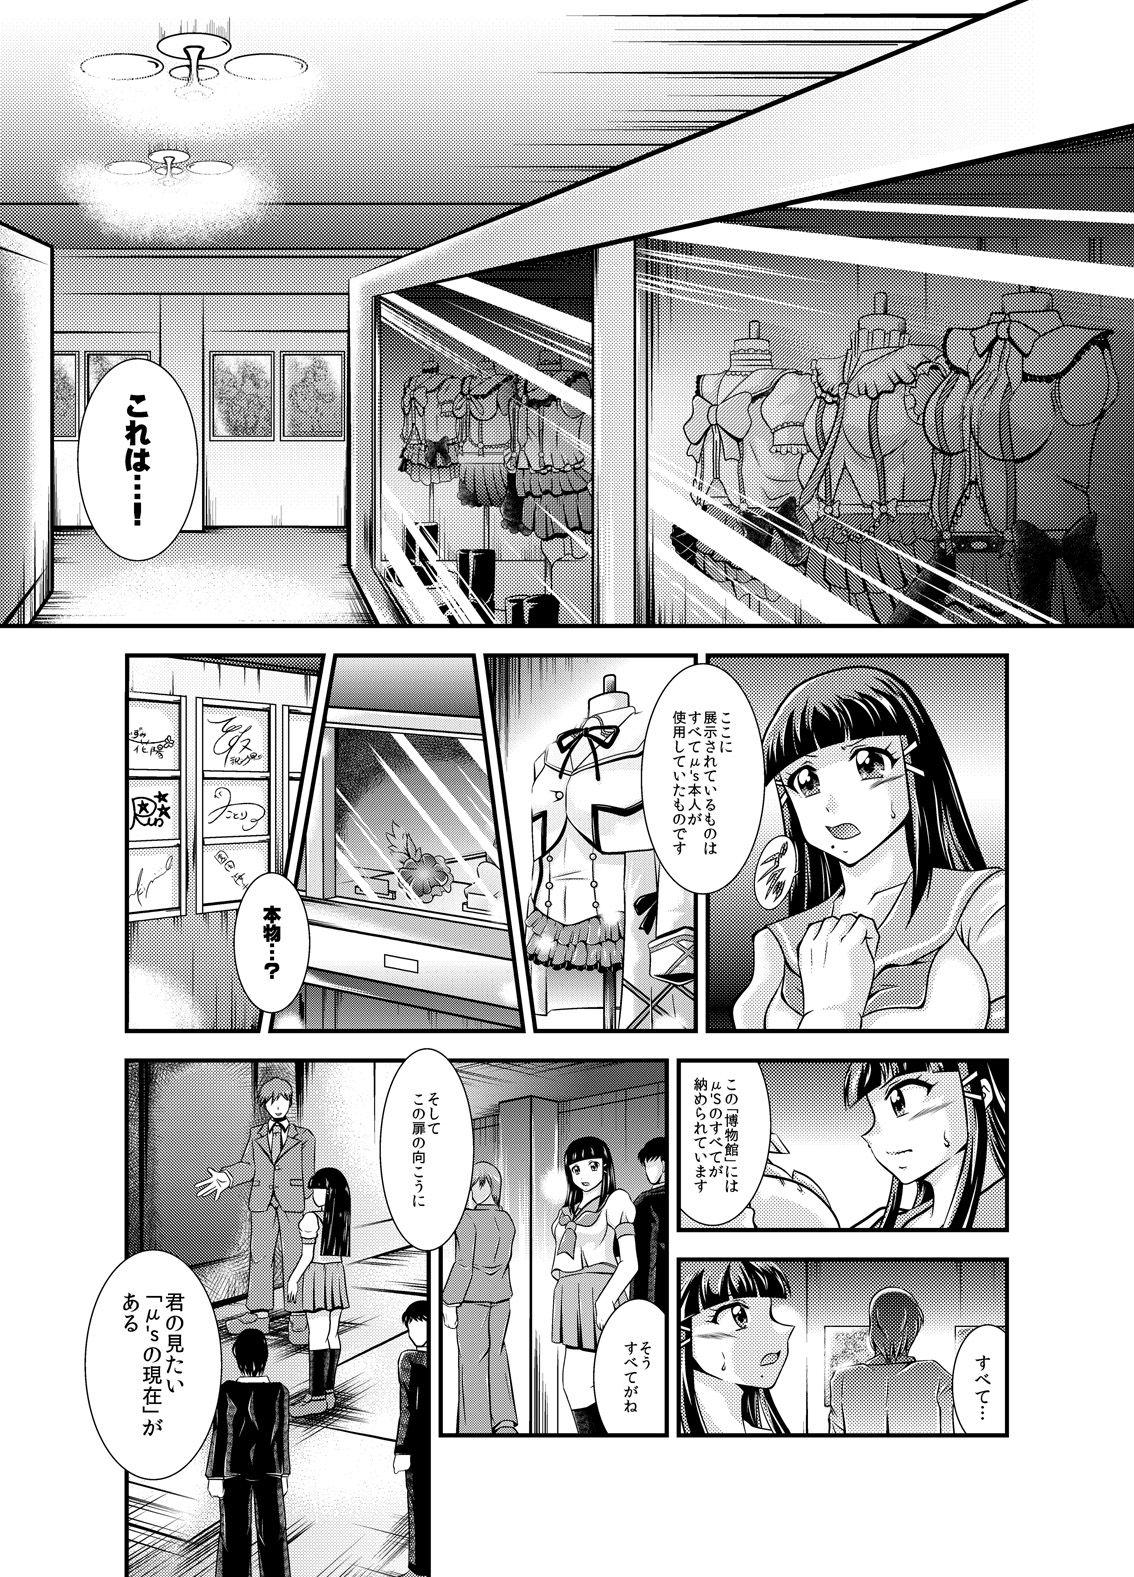 Cowgirl ProjectAqours EP02:"M"EMORIES - Love live Lesbos - Page 5